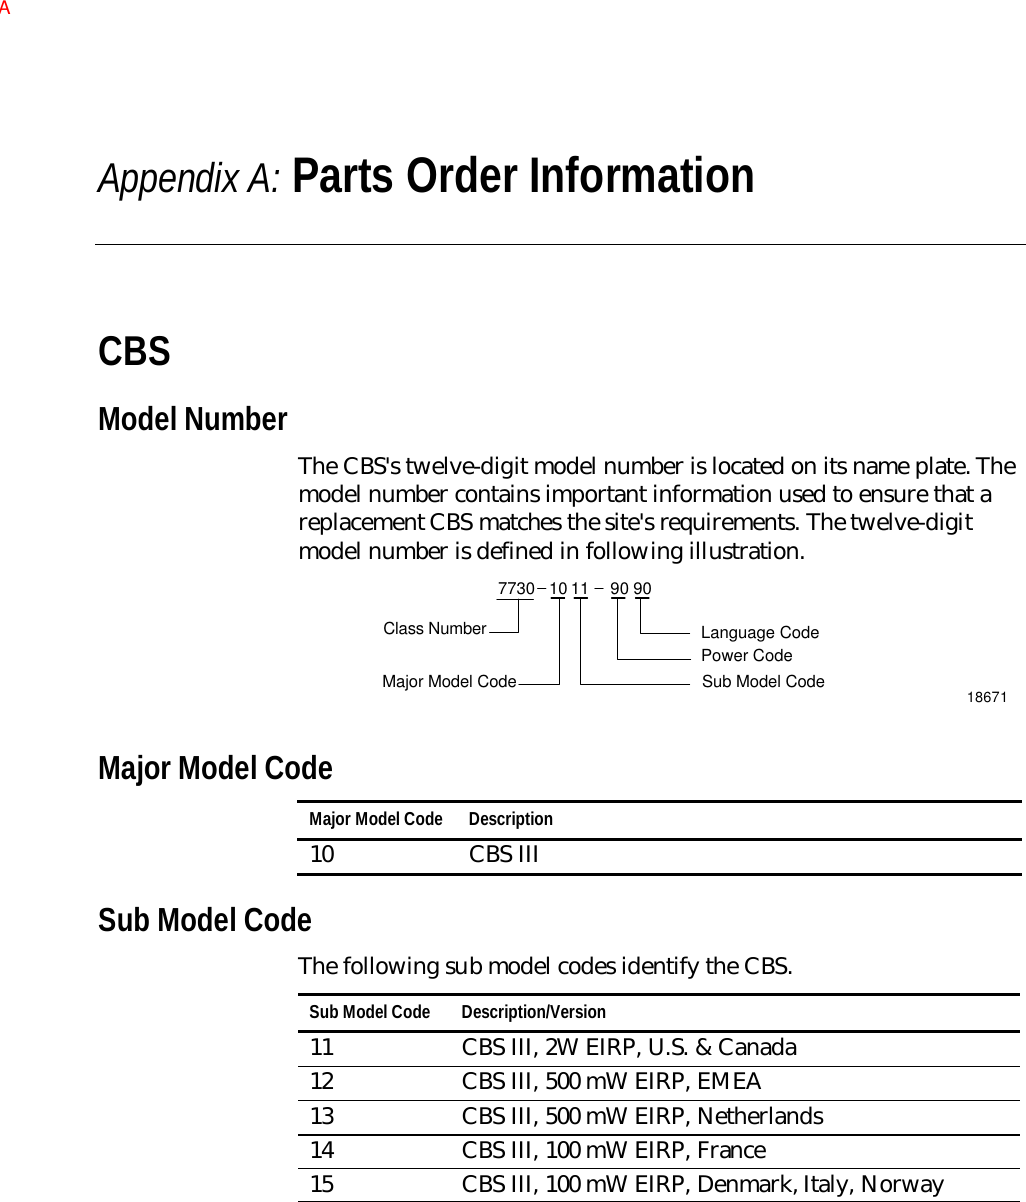 Appendix A: Parts Order InformationCBSModel NumberThe CBS&apos;s twelve-digit model number is located on its name plate. Themodel number contains important information used to ensure that areplacement CBS matches the site&apos;s requirements. The twelve-digitmodel number is defined in following illustration.7730 10 90 9011Language CodeMajor Model CodeClass NumberSub Model CodePower Code18671Major Model CodeMajor Model Code Description10 CBS IIISub Model CodeThe following sub model codes identify the CBS.Sub Model Code Description/Version11 CBS III, 2W EIRP, U.S. &amp; Canada12 CBS III, 500 mW EIRP, EMEA13 CBS III, 500 mW EIRP, Netherlands14 CBS III, 100 mW EIRP, France15 CBS III, 100 mW EIRP, Denmark, Italy, NorwayA